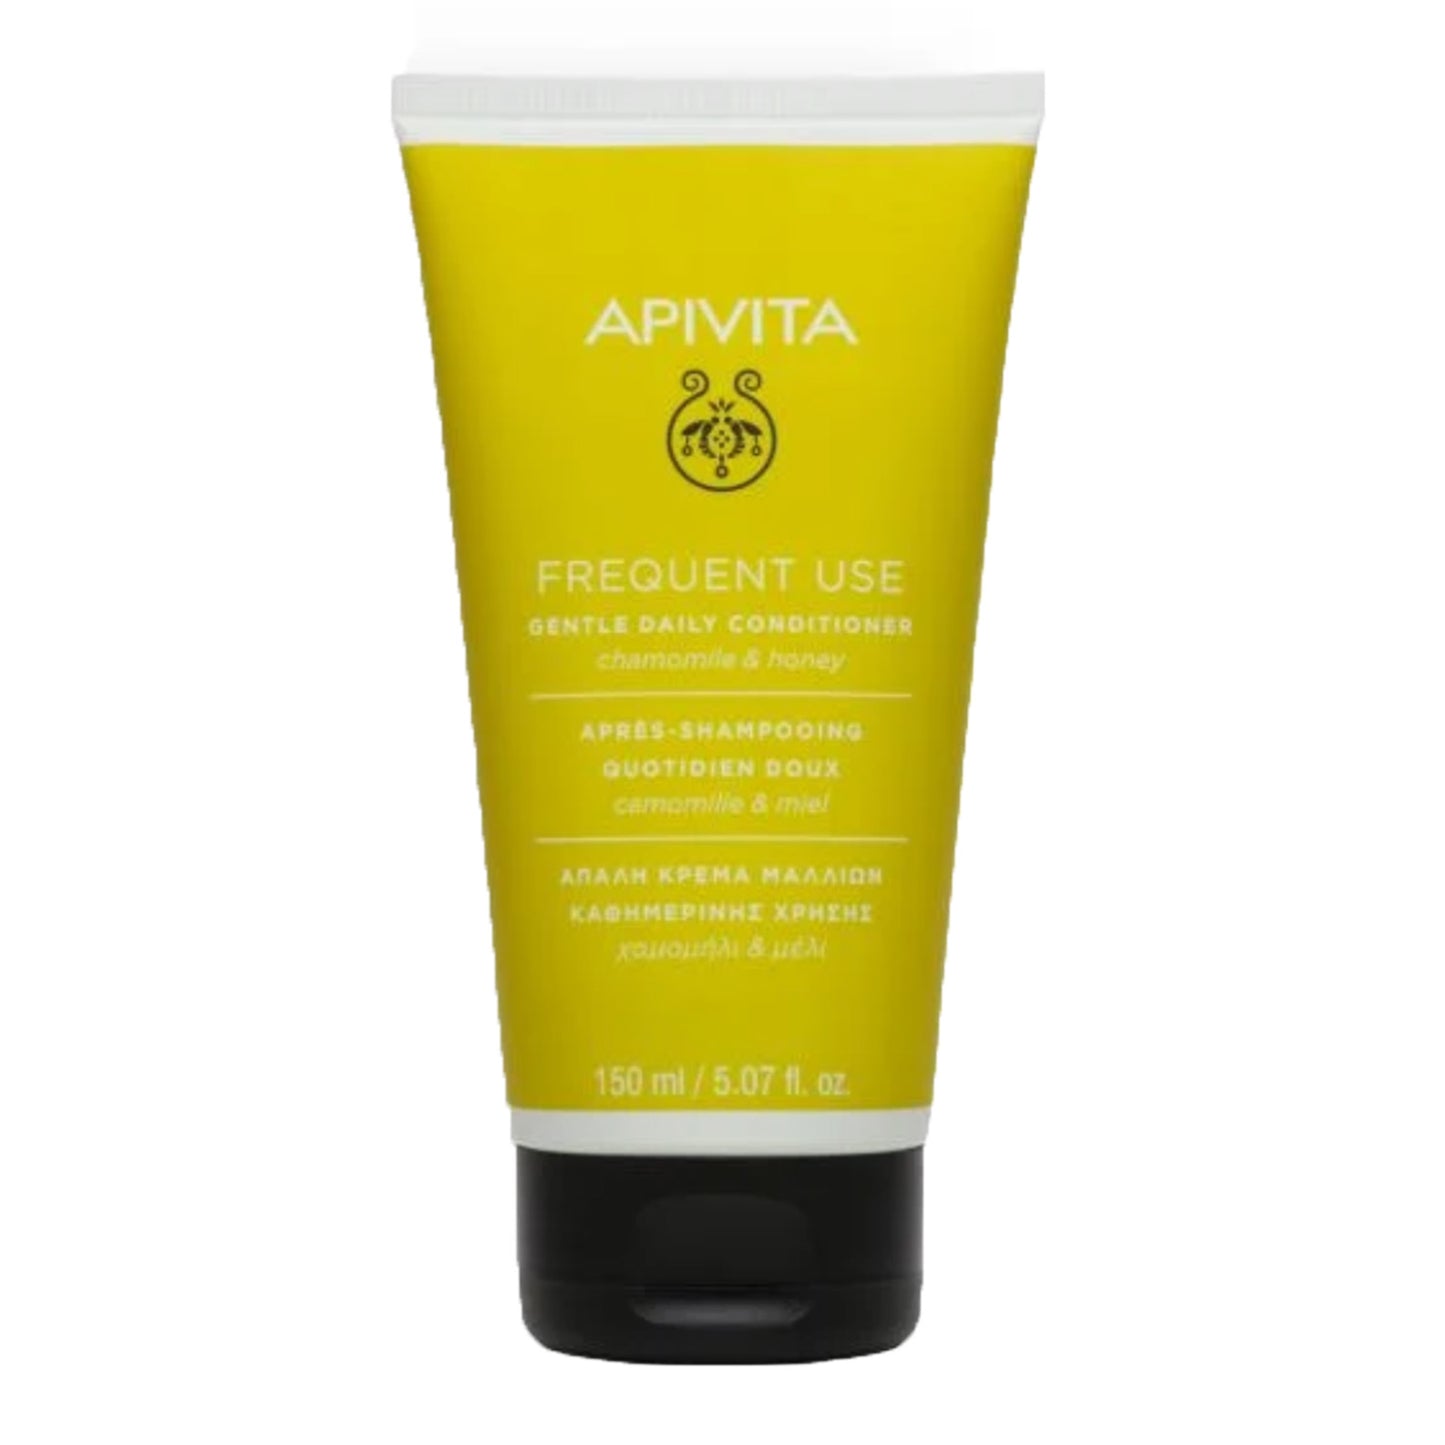 Apivita Frequent Use hair conditioner composed of 97% natural ingredients offers softness, suppleness, hydration & elasticity.